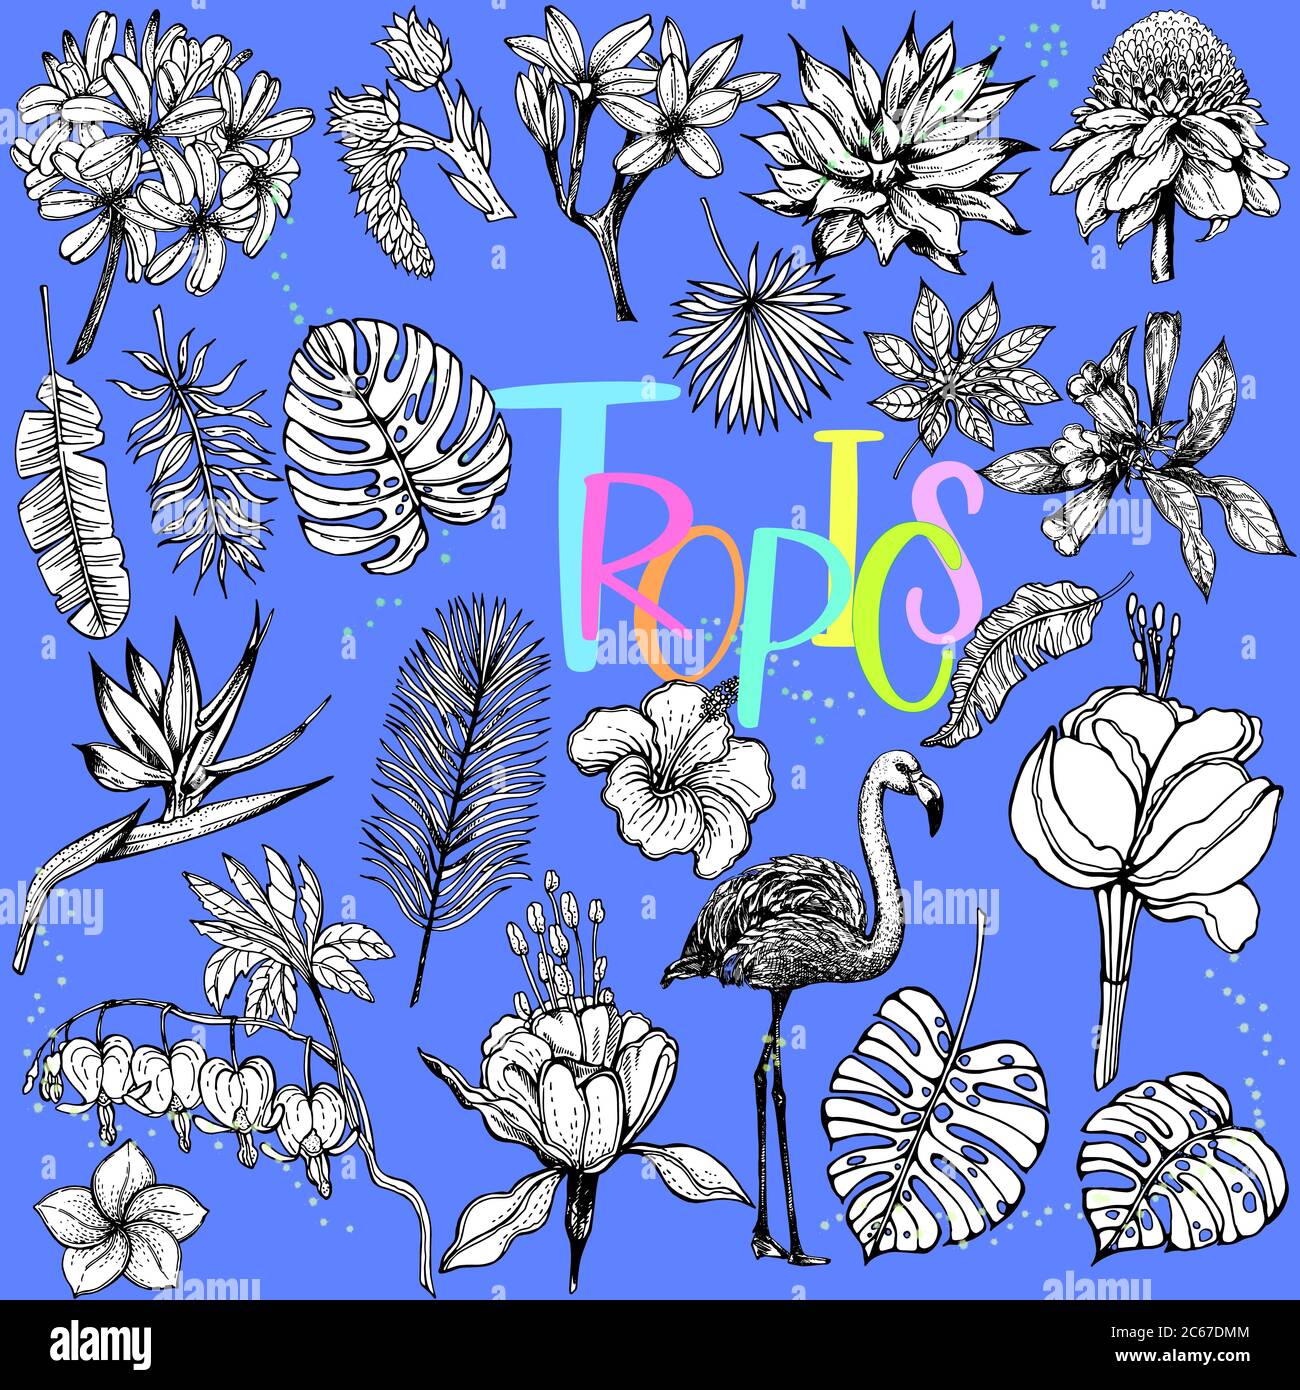 Big set of hand drawn sketch style tropical flowers, plants and flamingo isolated on blue background. Vector illustration. Stock Vector